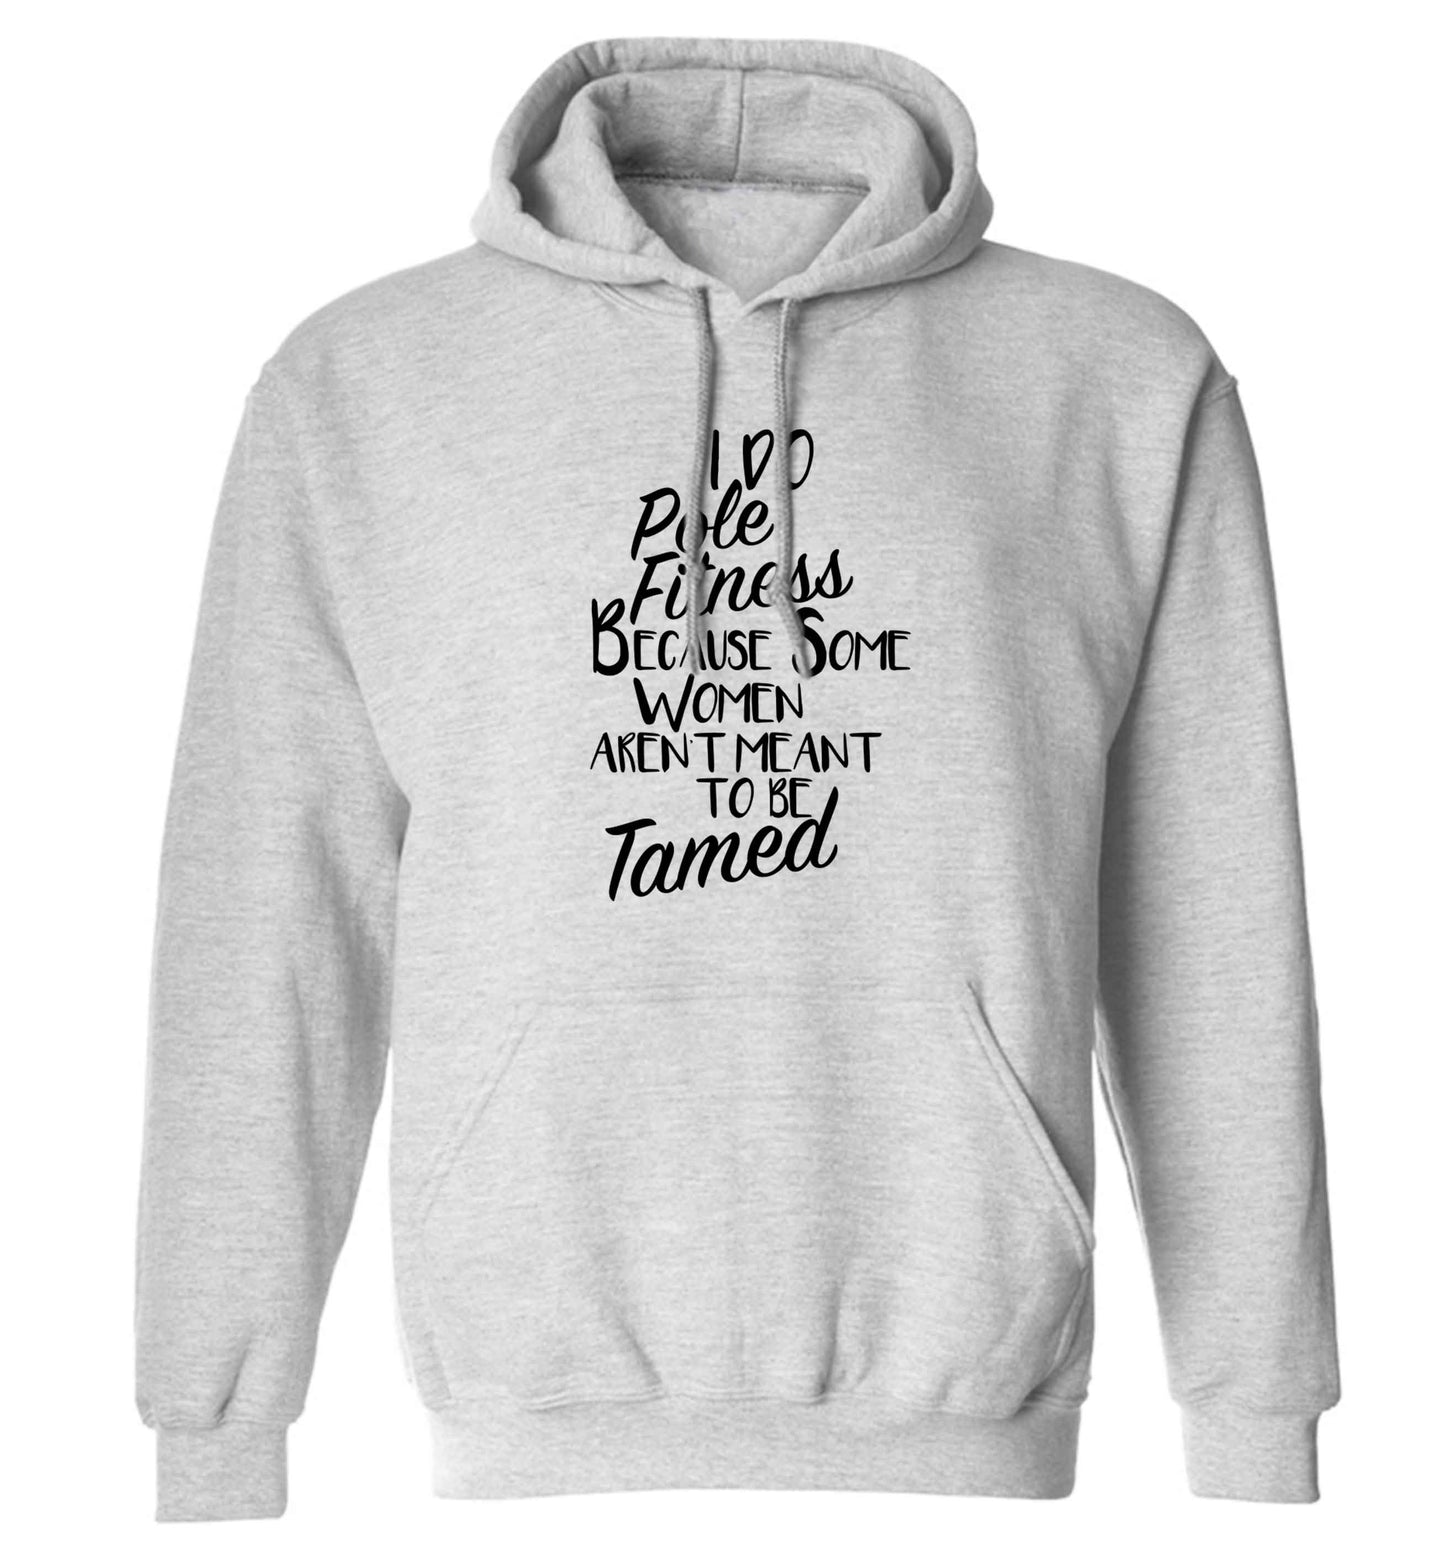 I do pole fitness because some women aren't meant to be tamed adults unisex grey hoodie 2XL